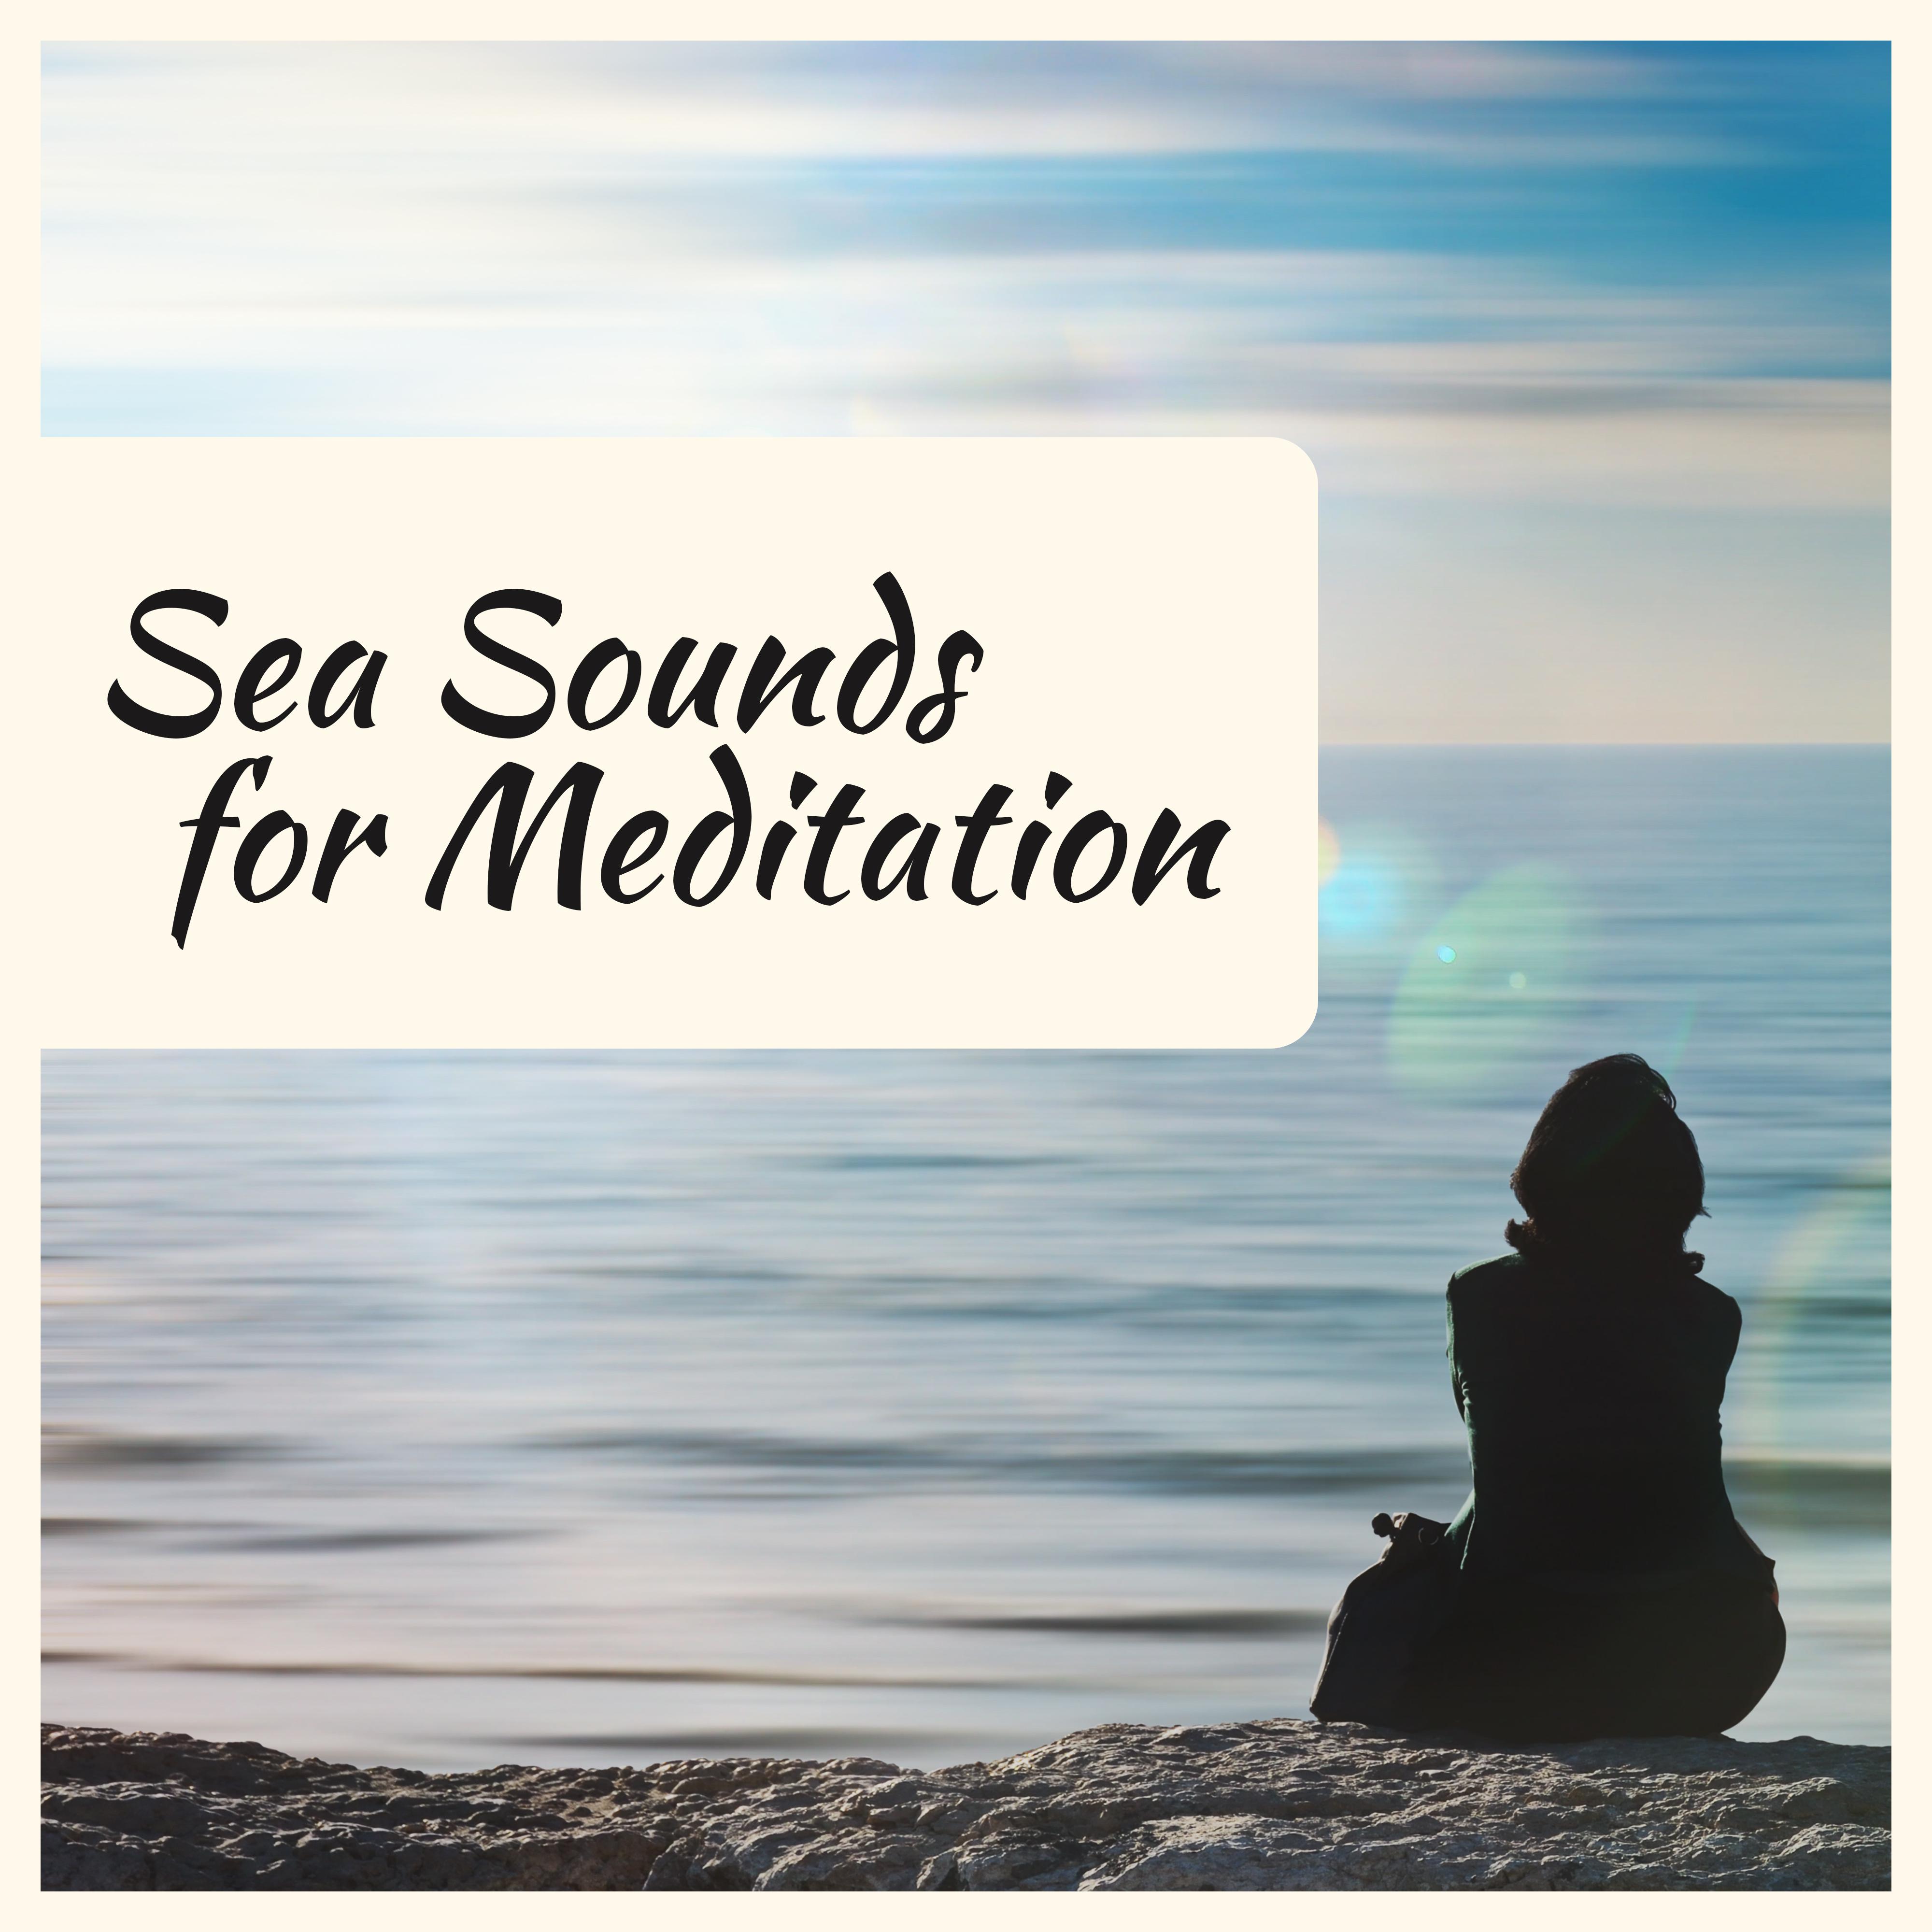 Sea Sounds for Meditation – Soft Music to Calm Down, Exercise Yoga, Pure Waves, Deep Relief, Relaxation Therapy, Peaceful Mind, Meditate